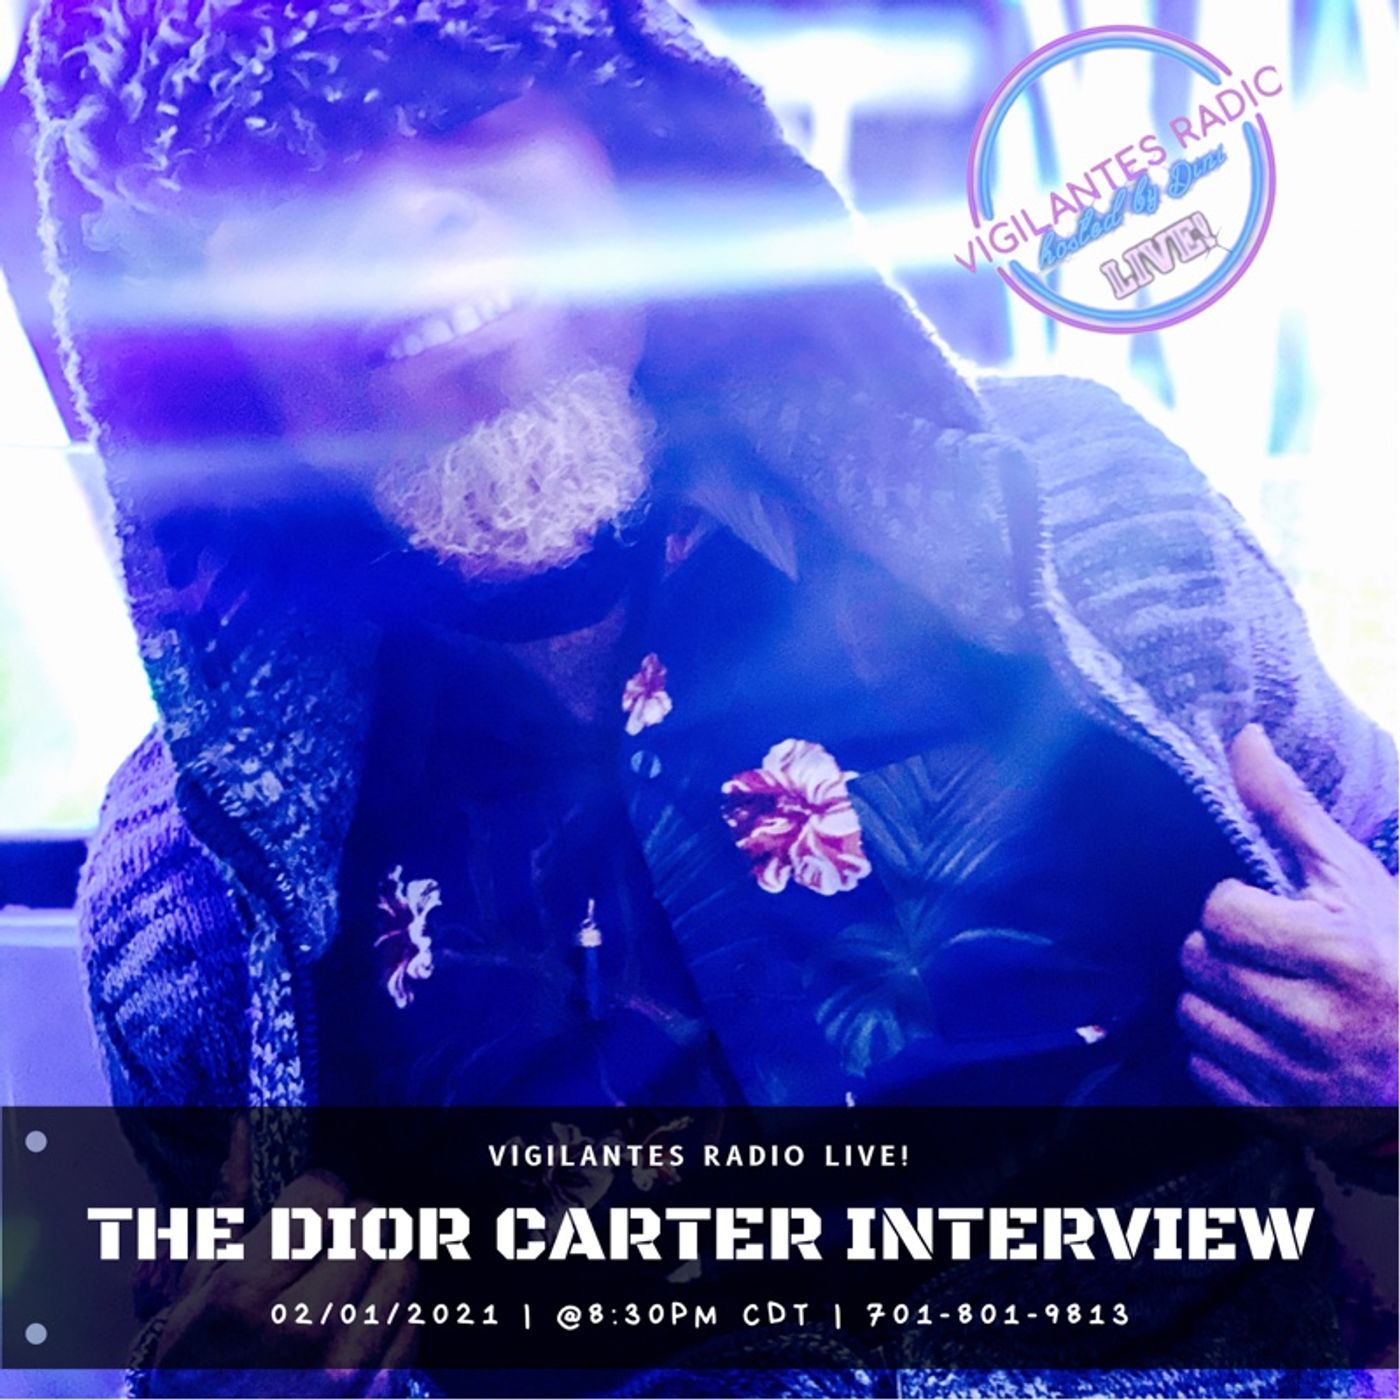 The Dior Carter Interview. Image